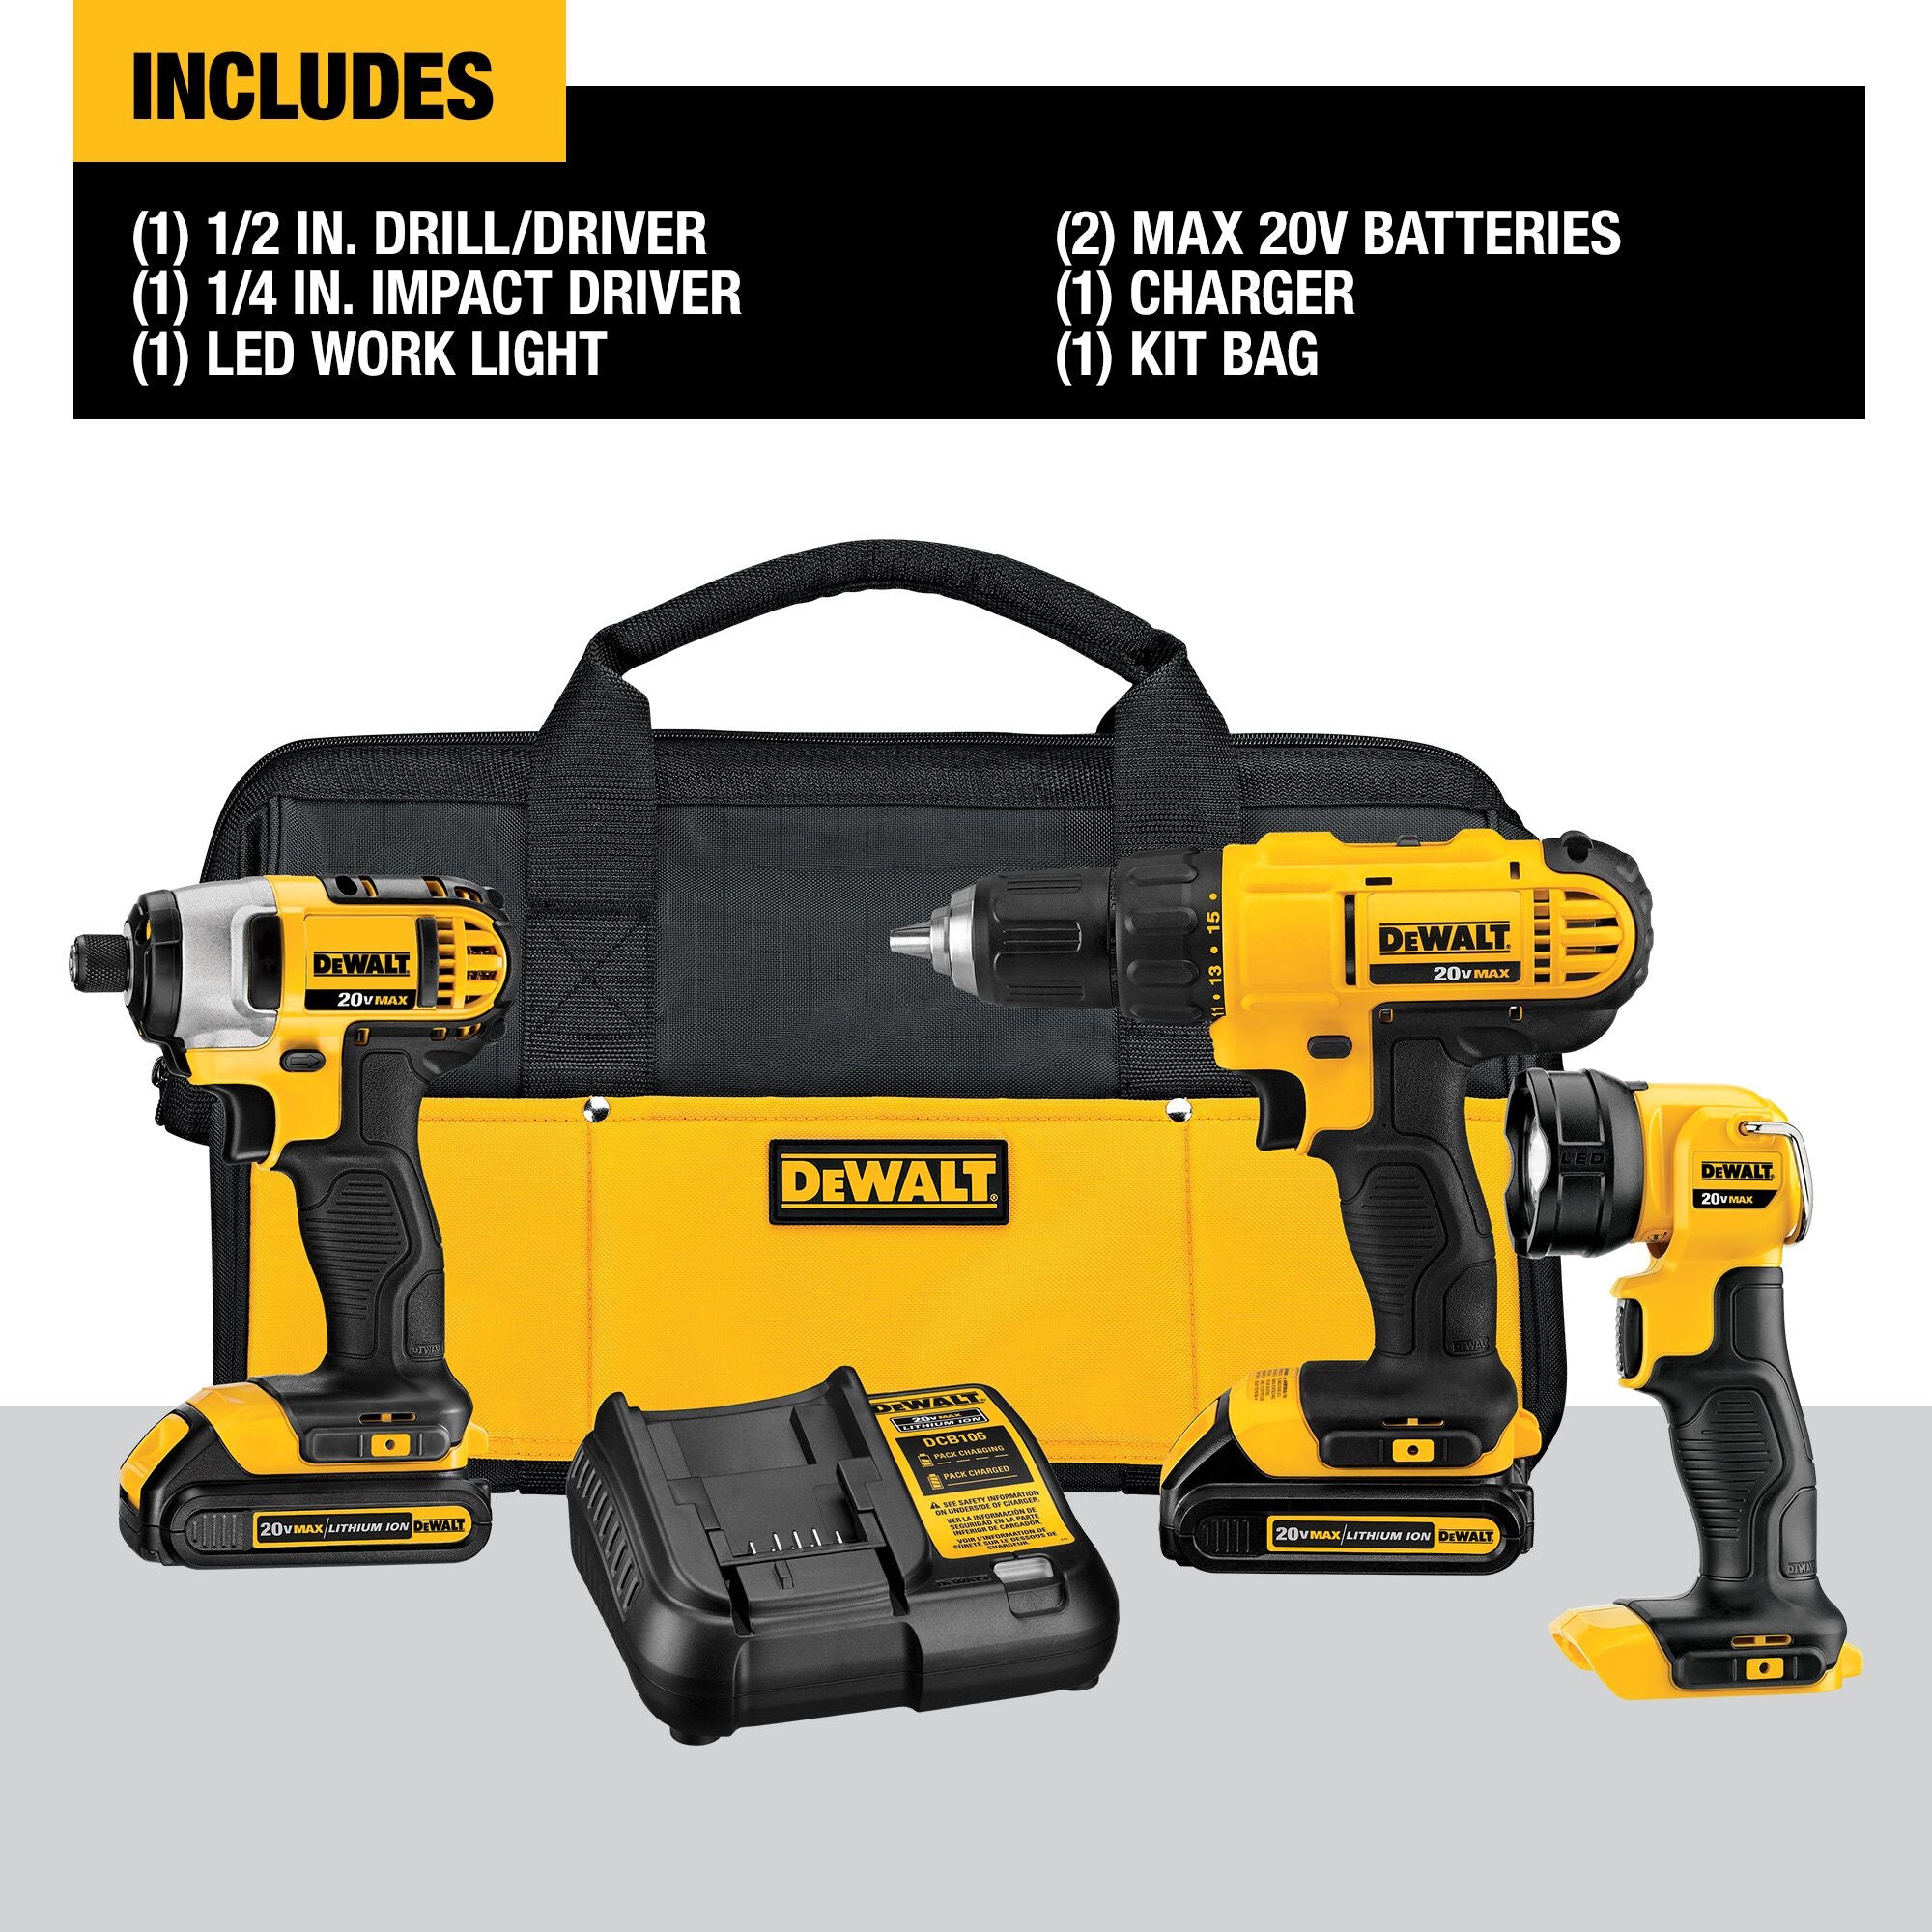 DeWALT DCK340C2 20V Compact 3-Tool Combo Kit (Drill, Impact, & Flashlight) with Charger, Two Batteries, and Bag